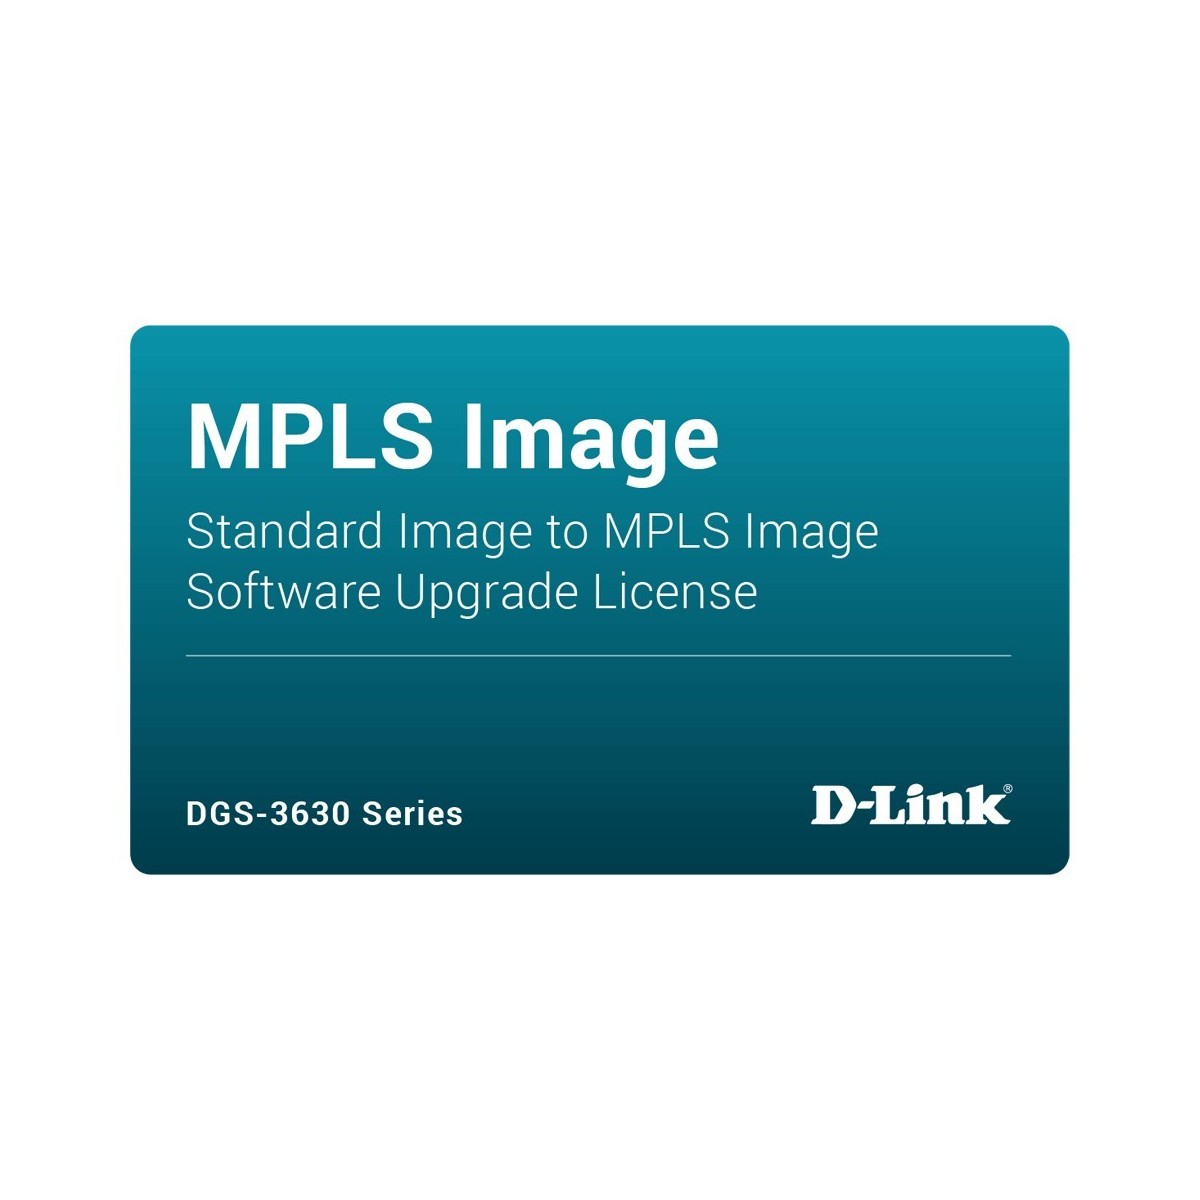 D-Link LICENSE DGS-3630-52TC-SM-LIC STANDARD TO MPLS IMAGE - 1 license(s) - Full - Upgrade